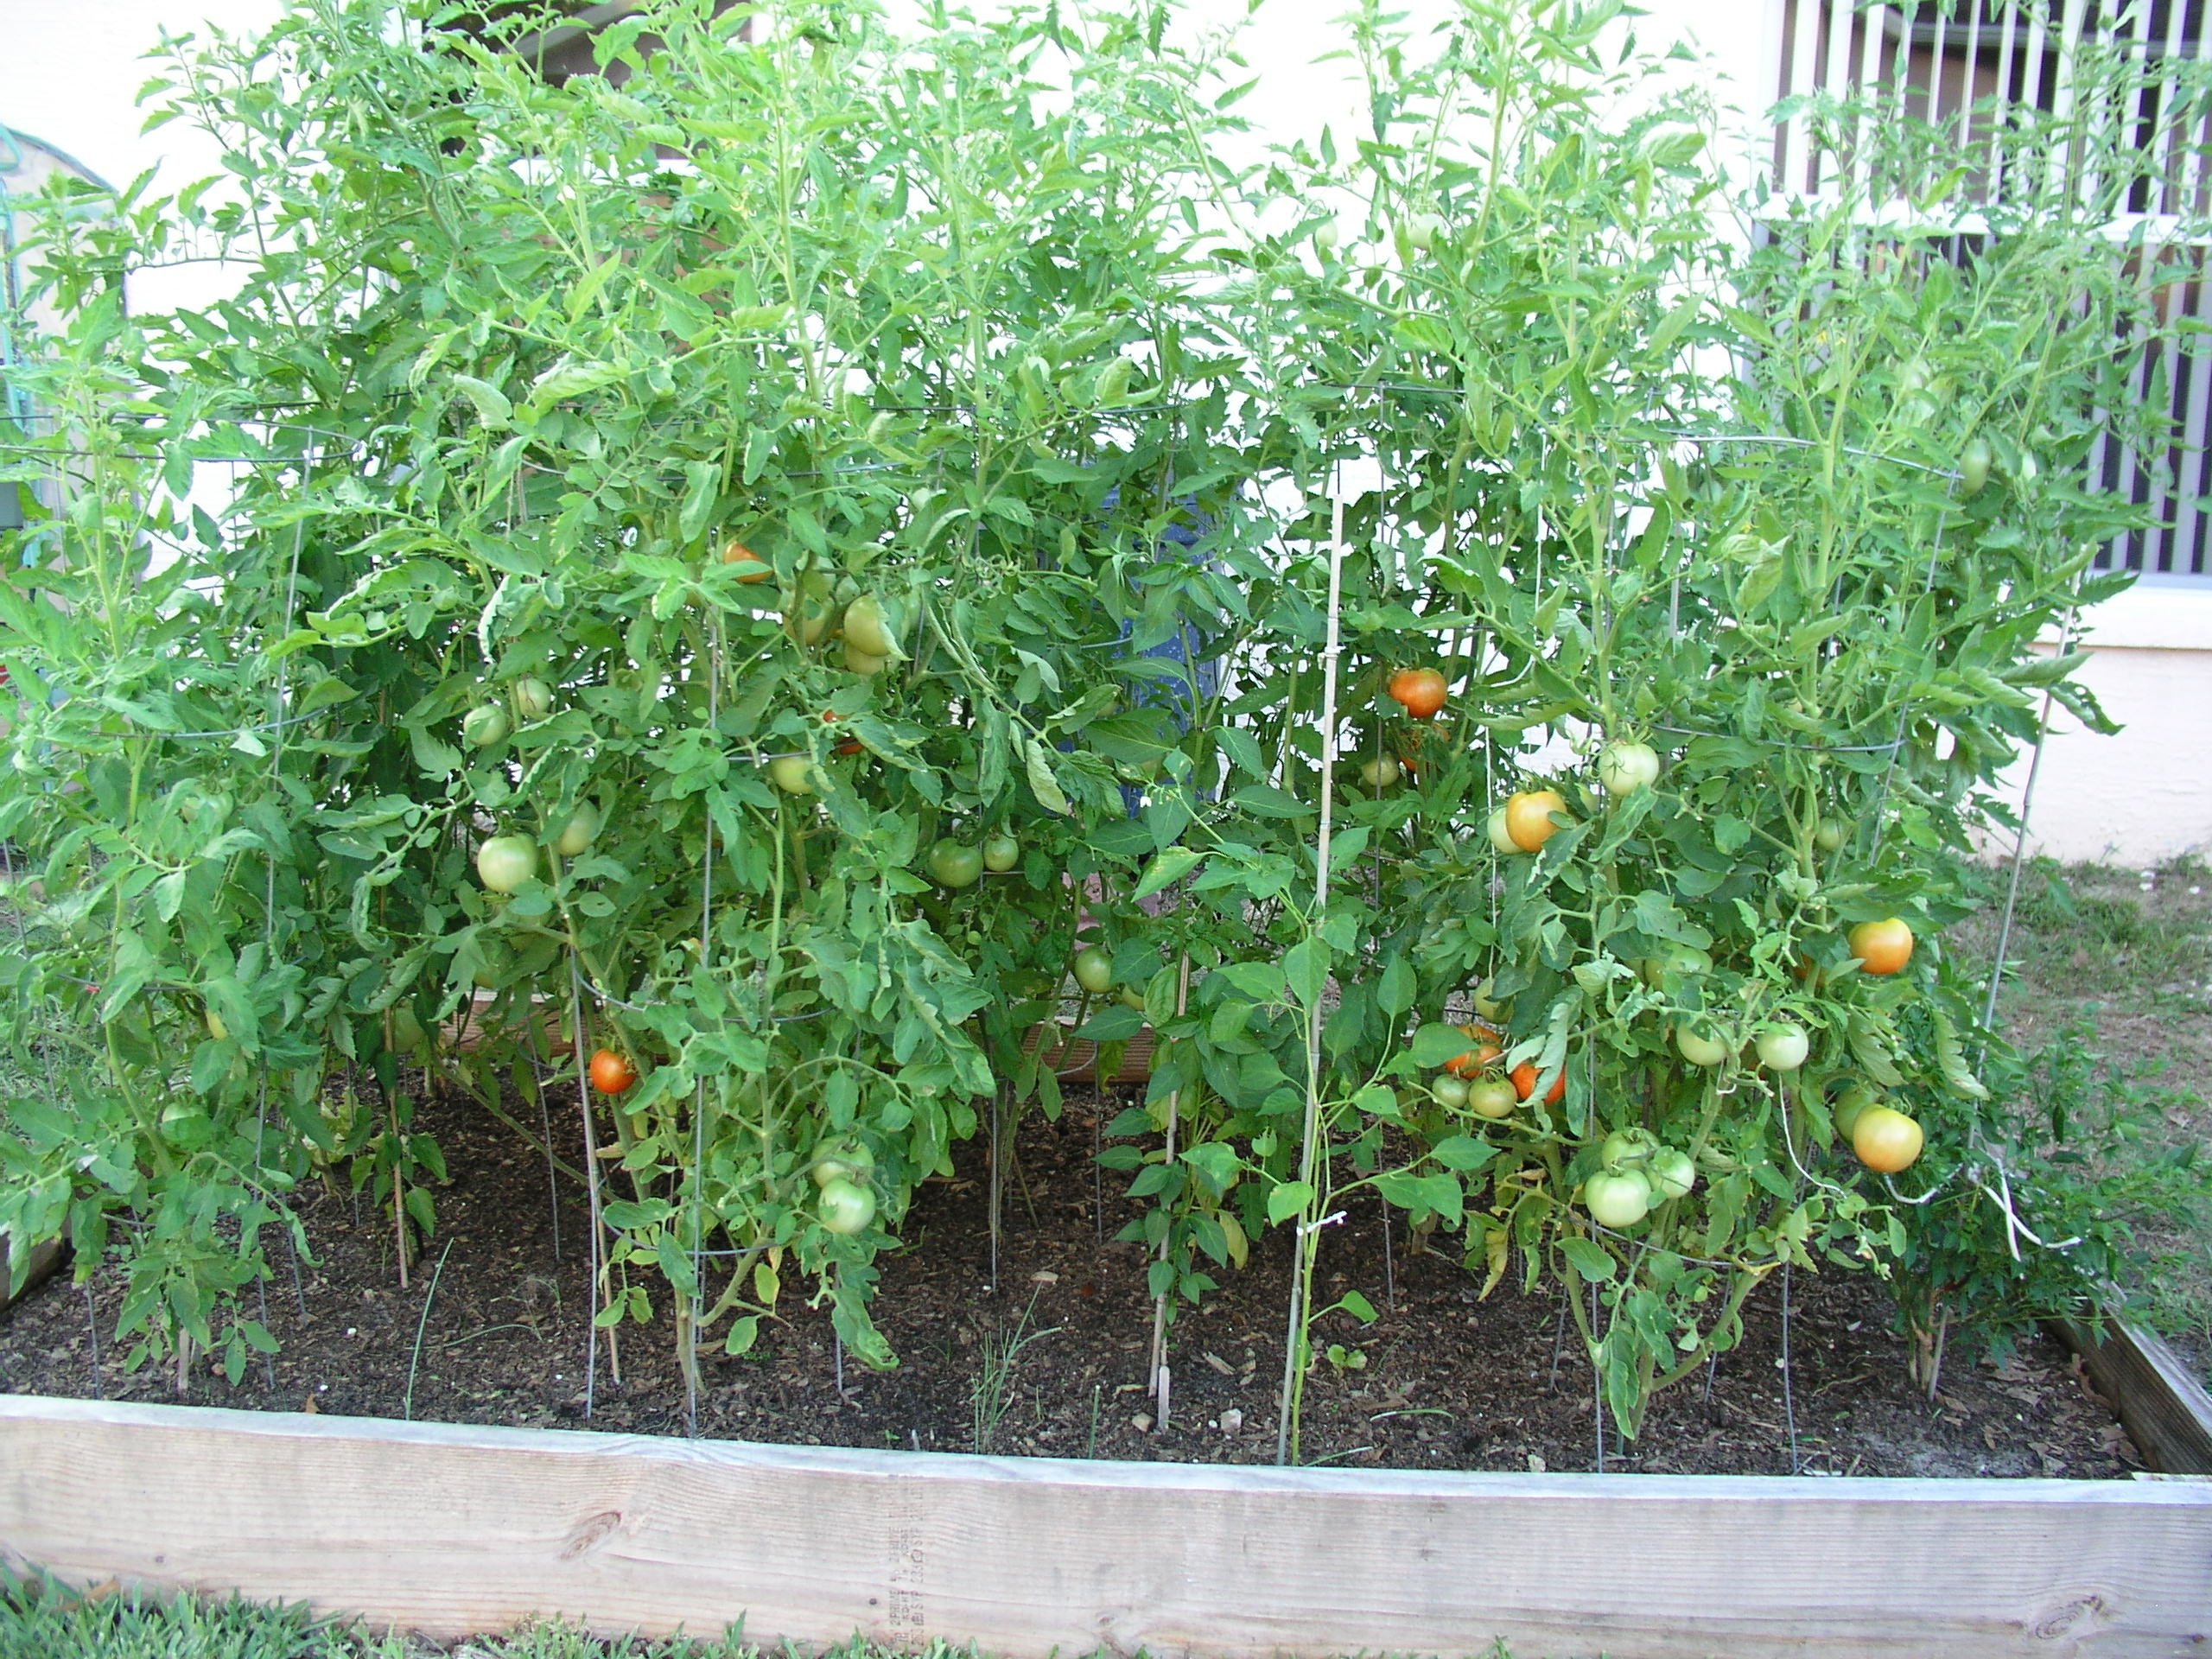 Florida Raised Beds Gardens Growin, How To Plant Tomatoes In A Raised Bed Garden